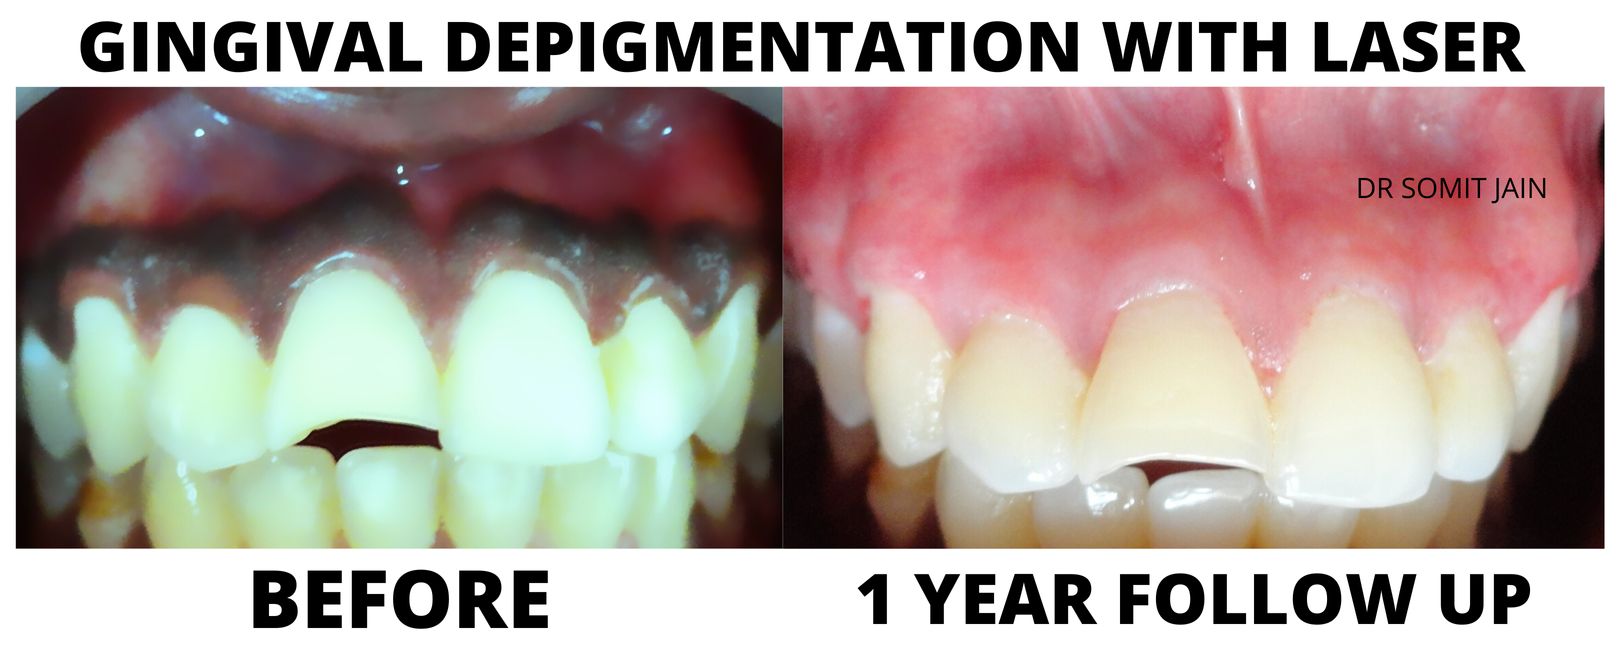 GINGIVAL DEPIGMENTATION WITH LASER